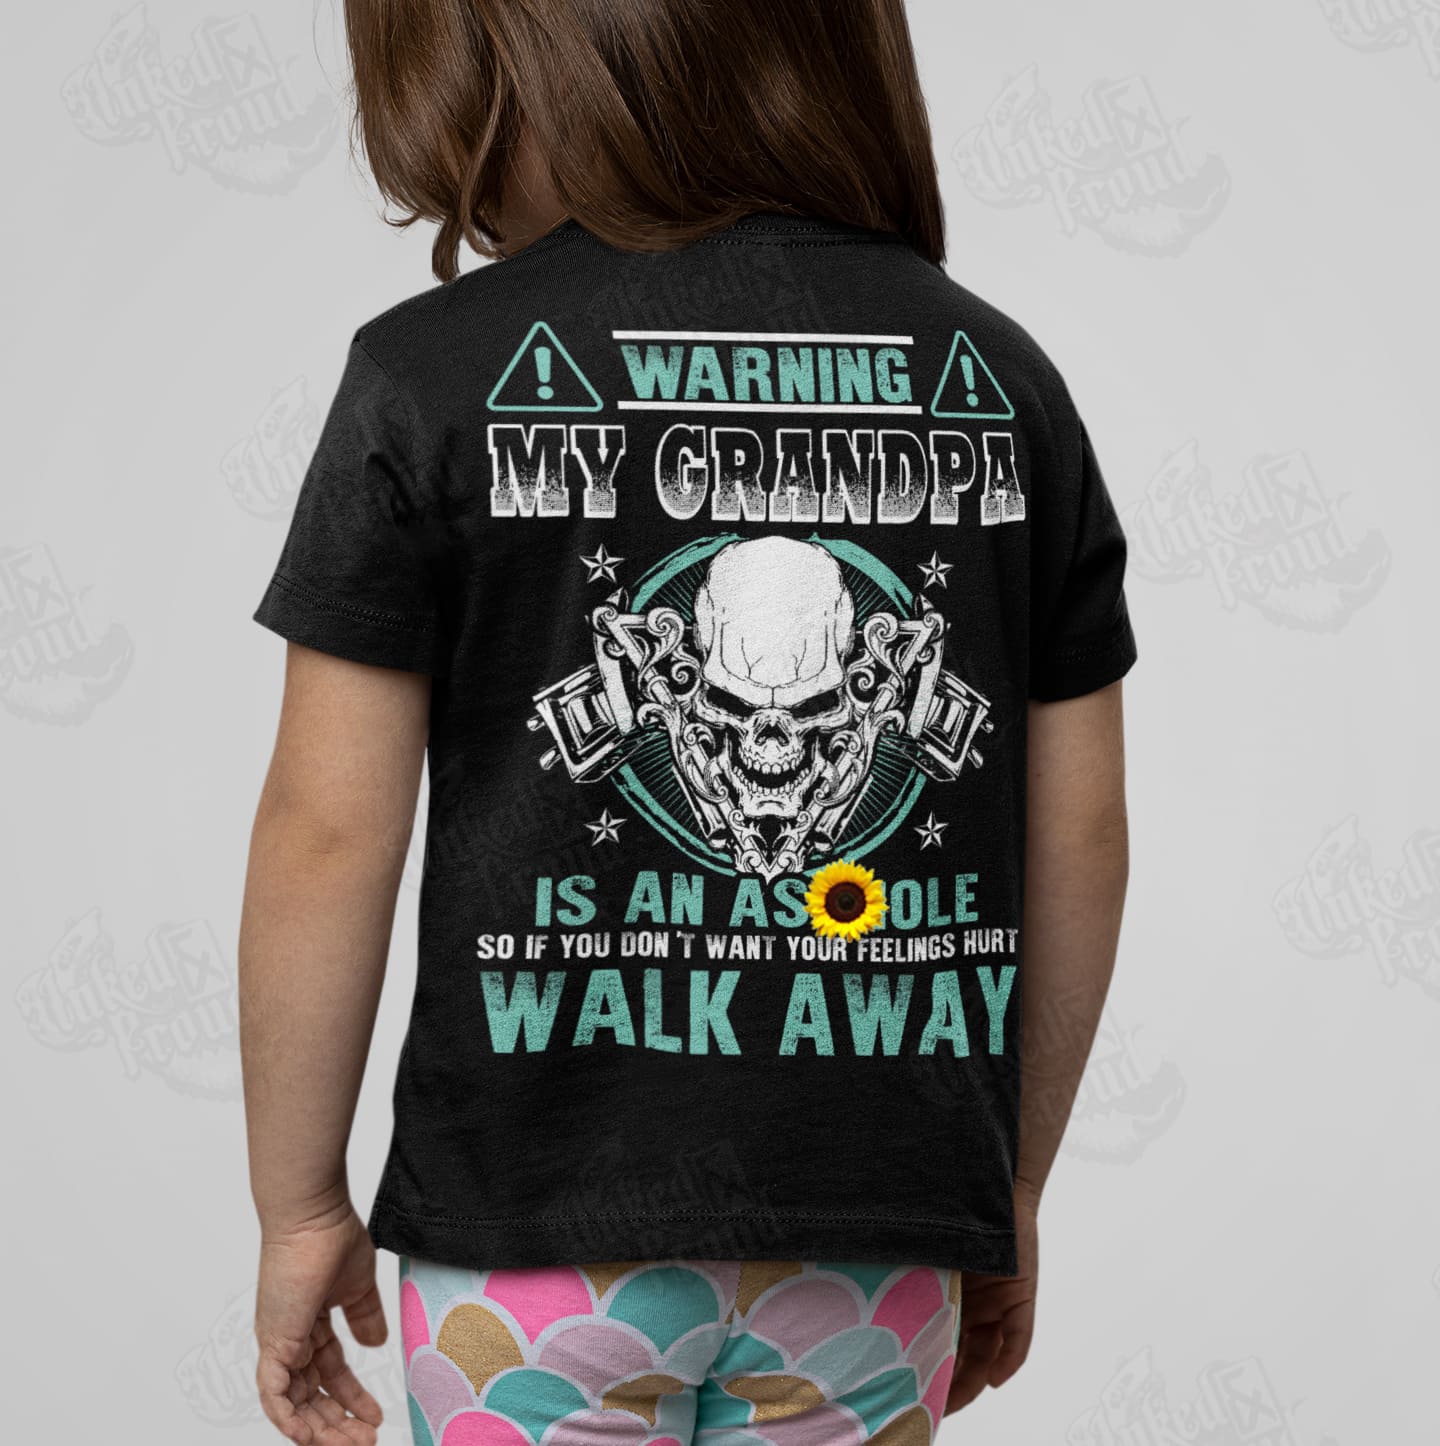 My grandpa is an asshole so if you don't want your feelings hurts walk away - Gift for grandpa